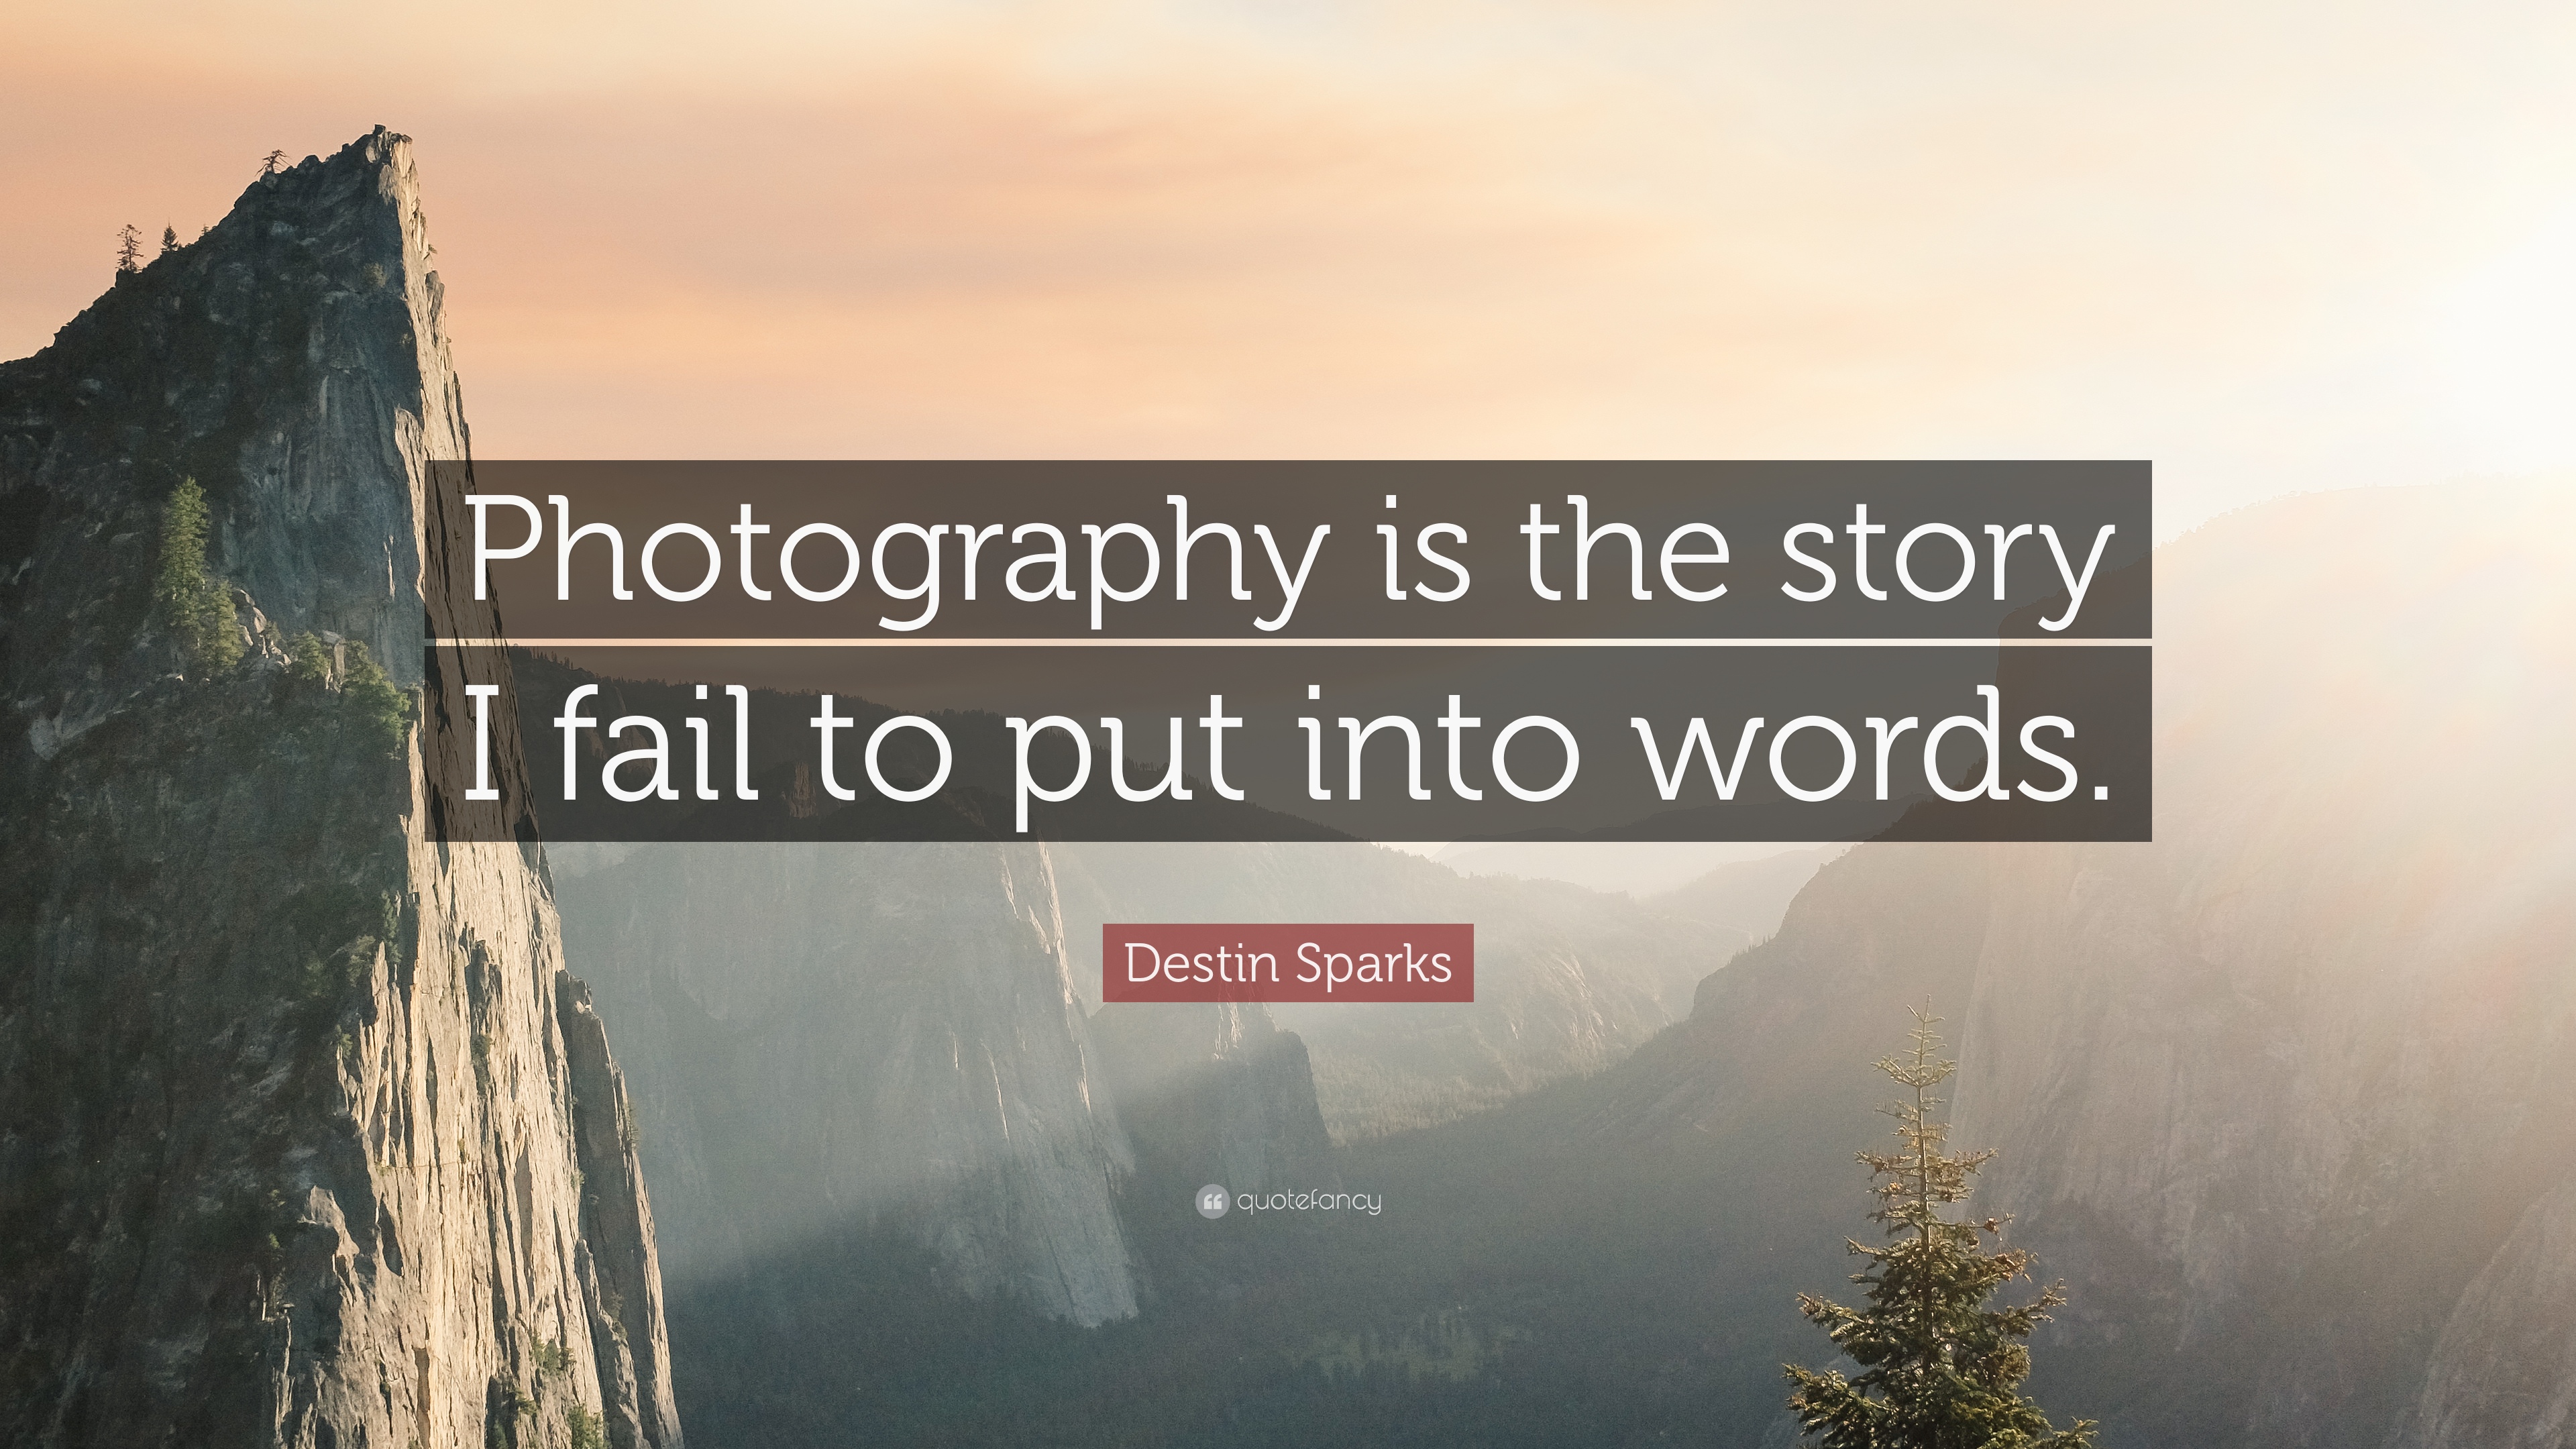 Photography is the story I fail to put into words. Destin Sparks